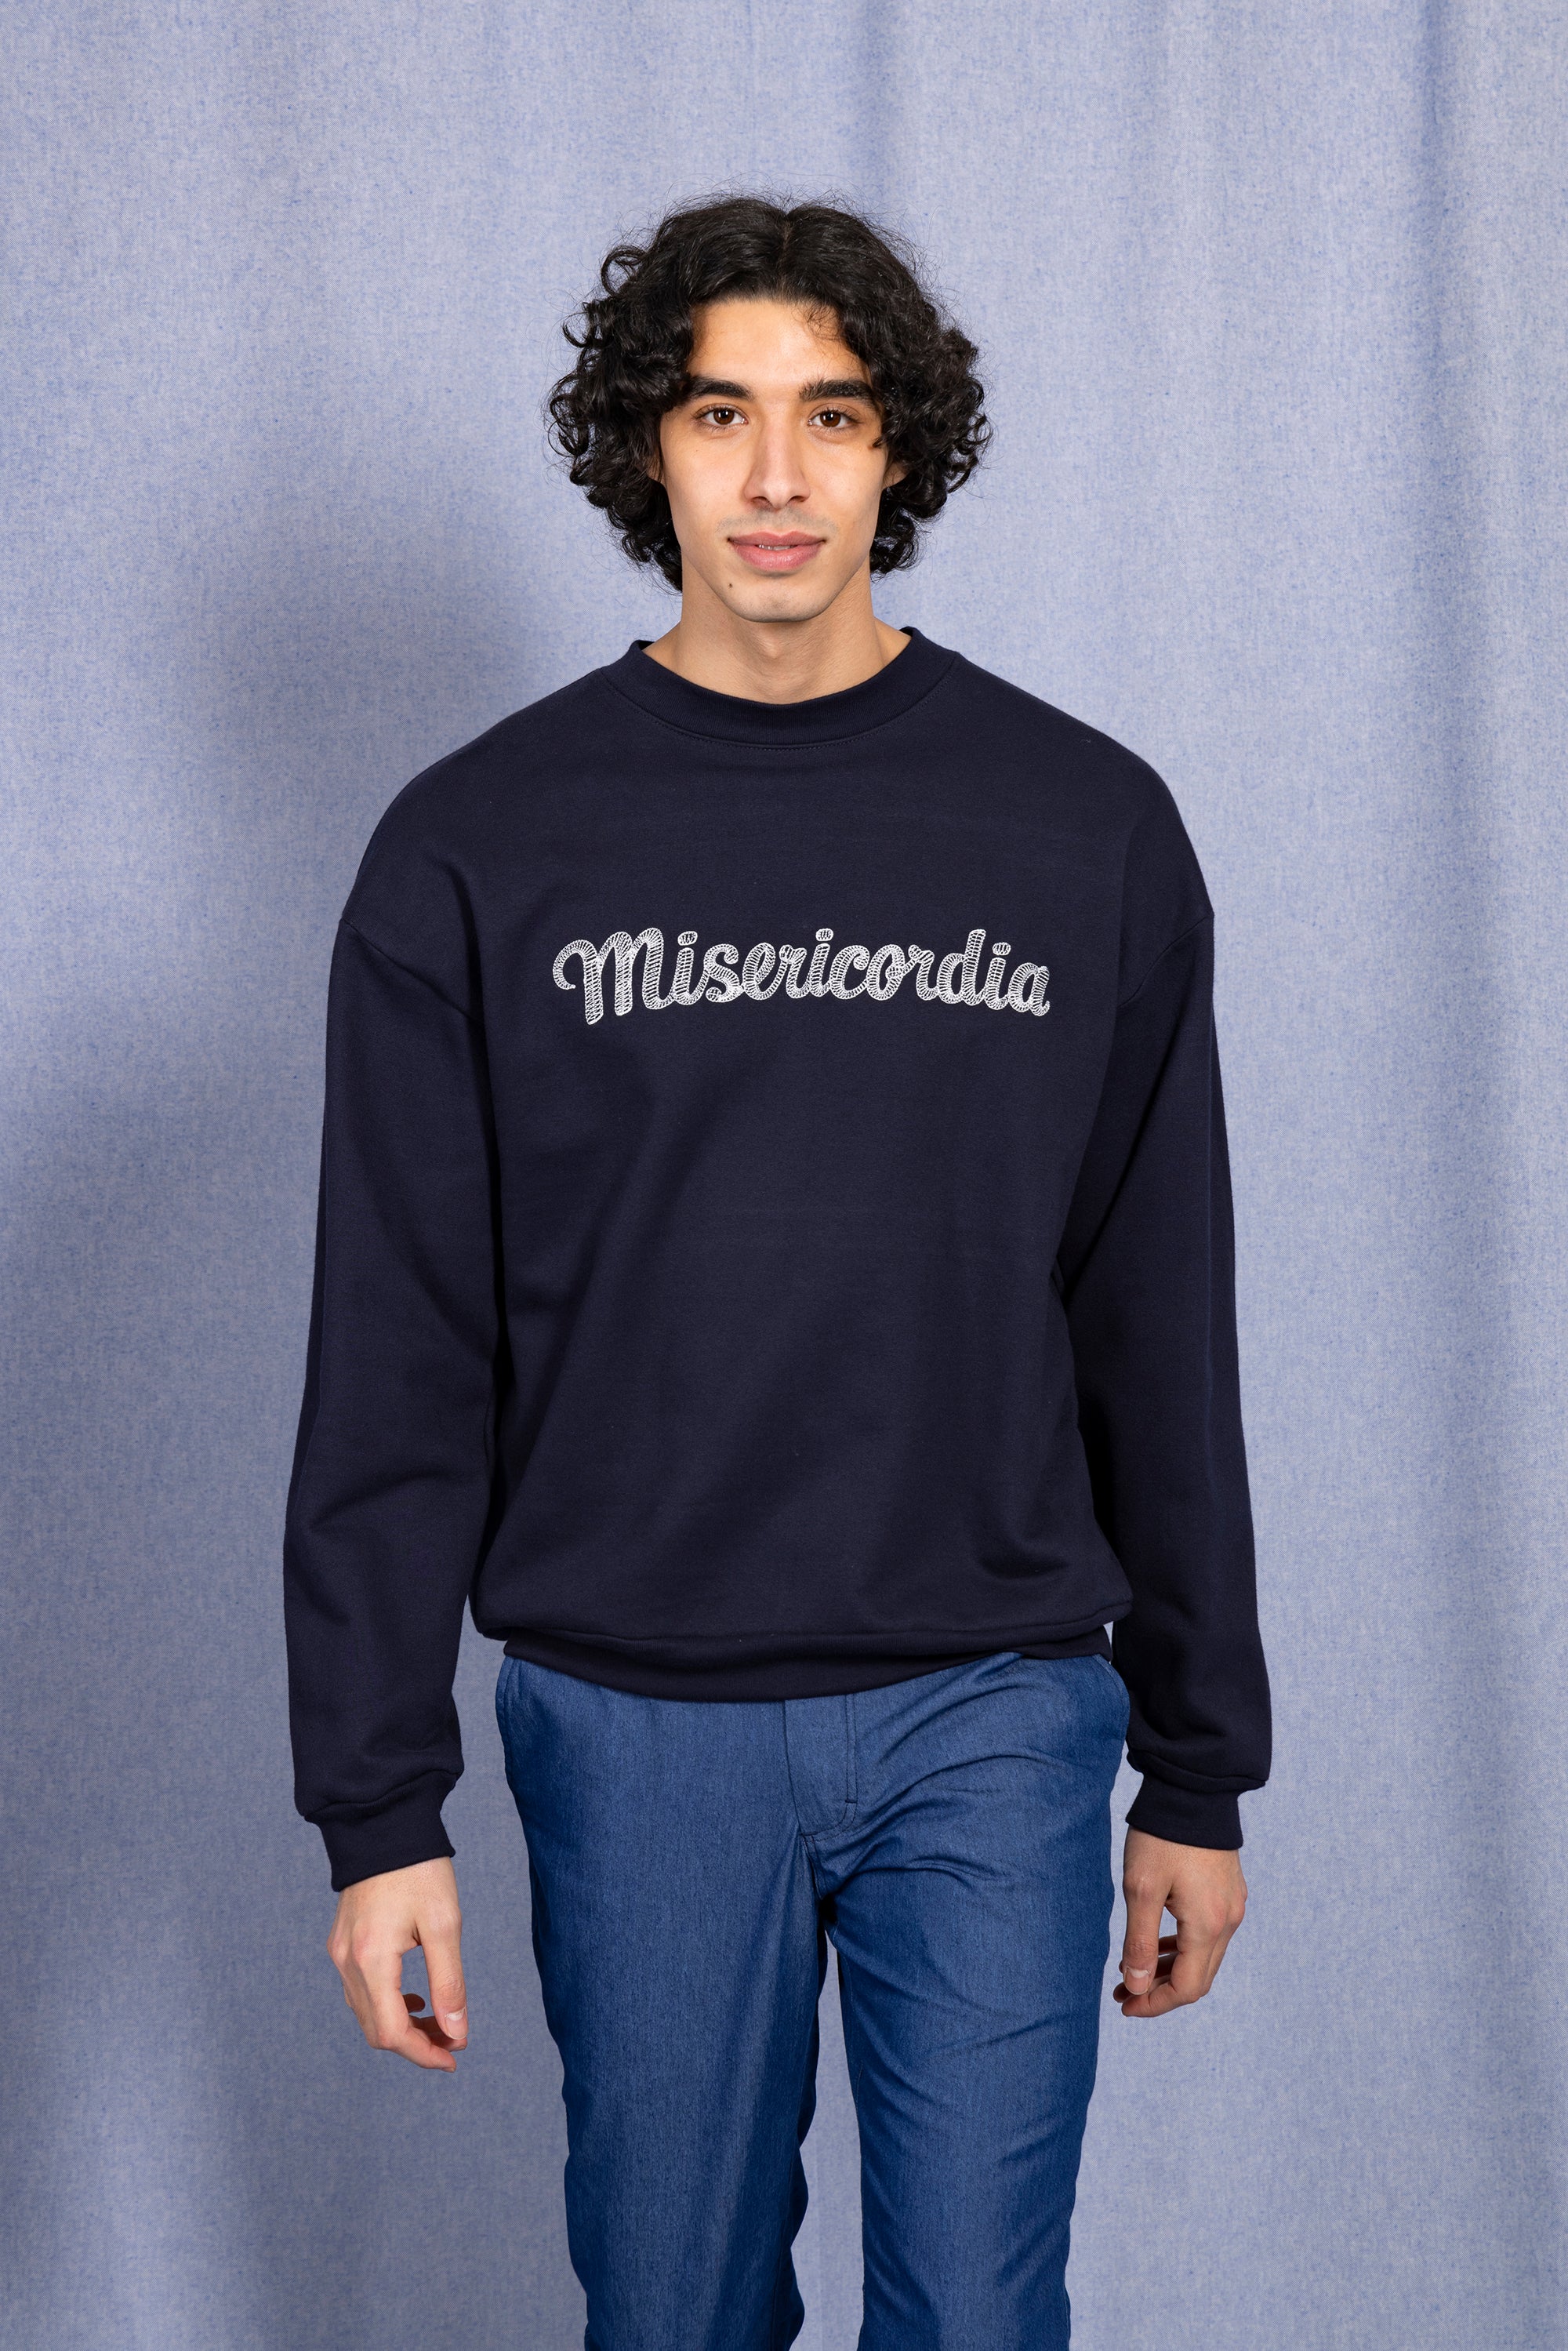 Classic navy blue men's sweater in fair trade ethical Peruvian cotton